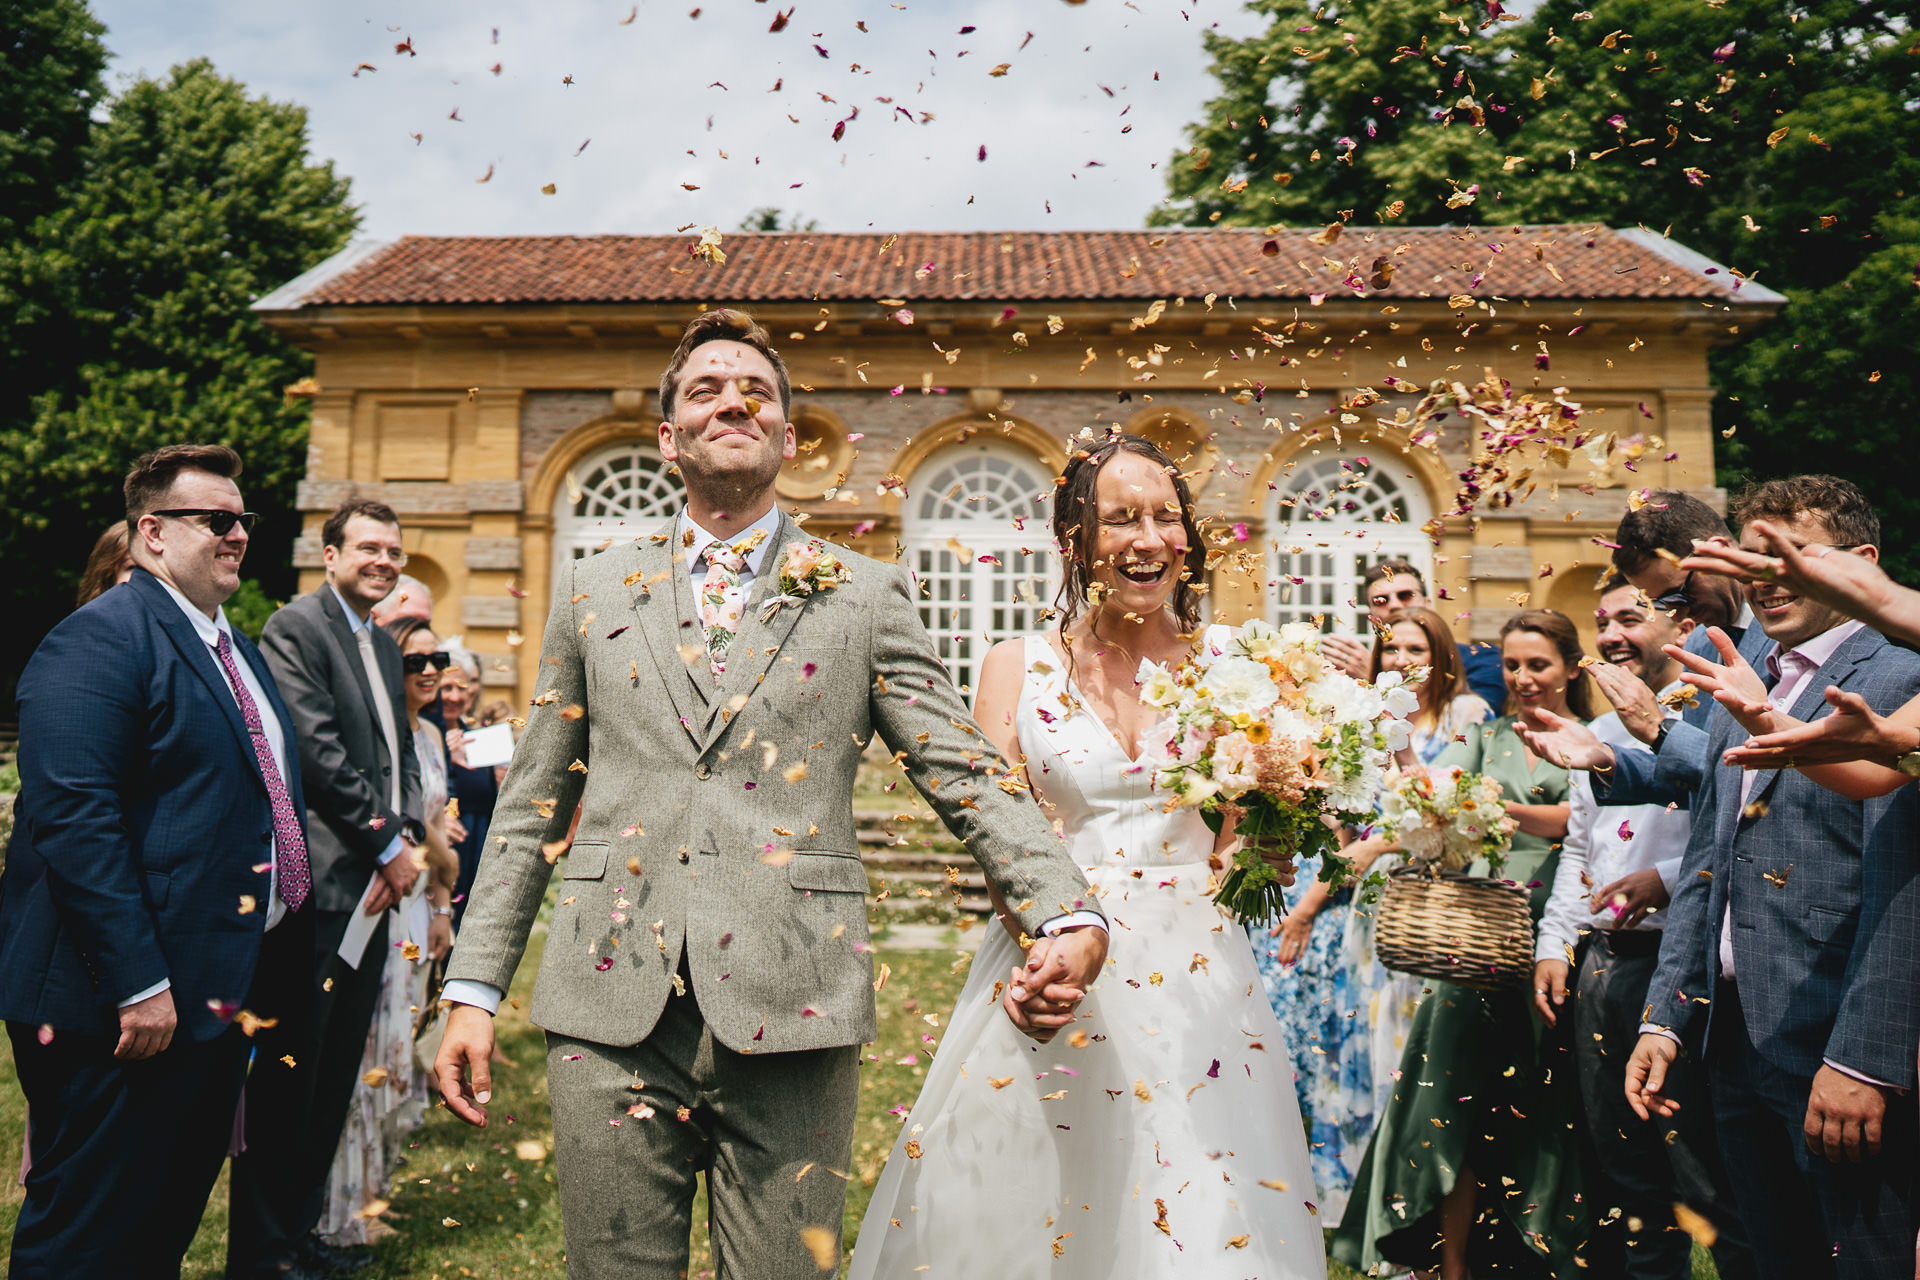 A bride and groom walking through confetti with an orangery behind them